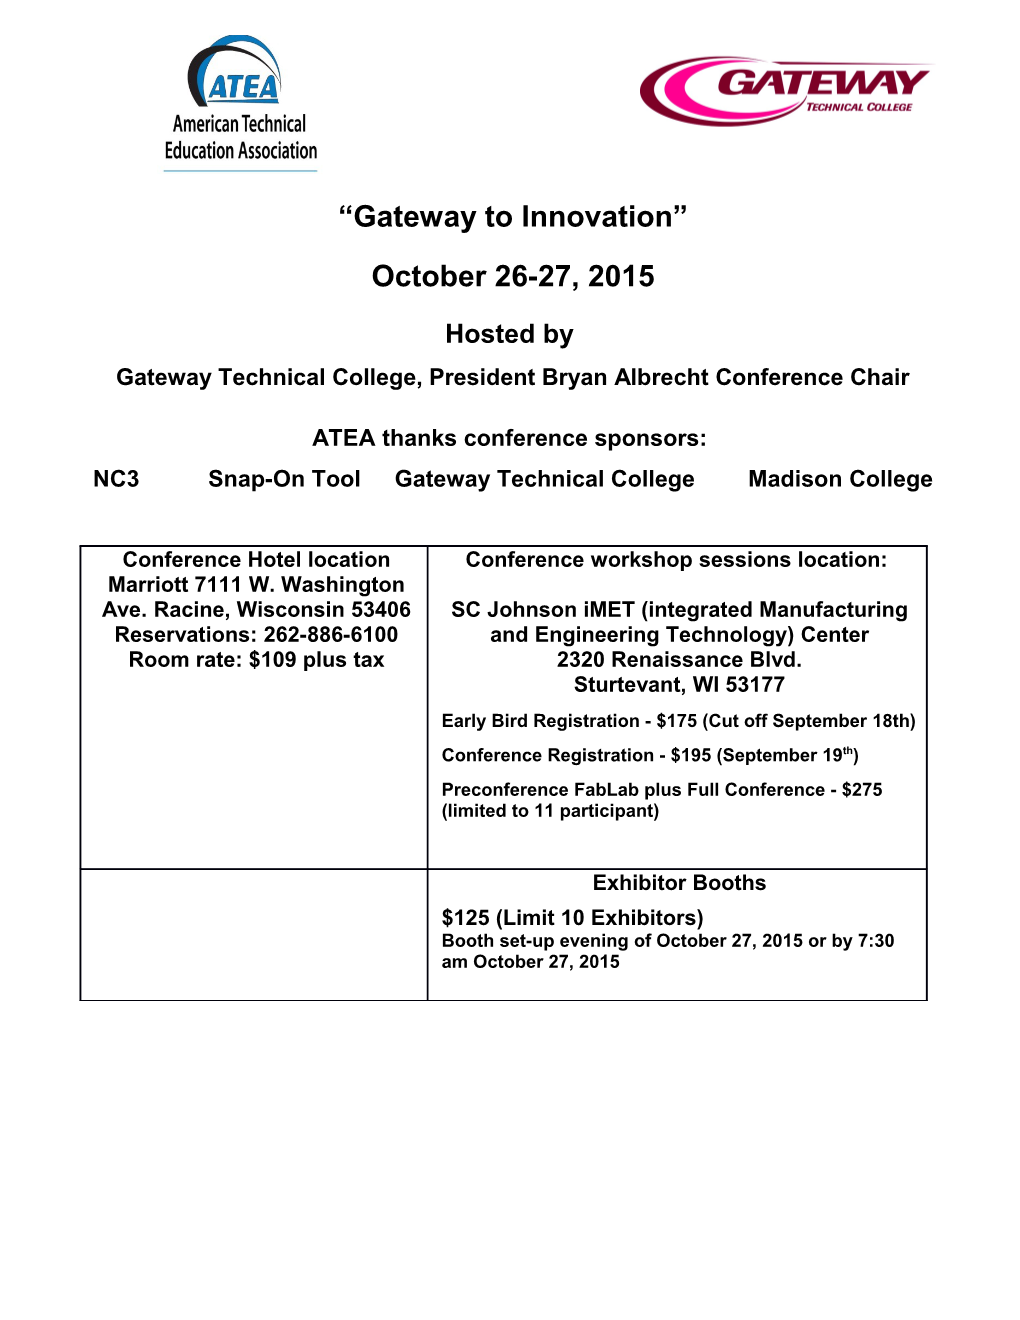 Gateway Technical College, President Bryan Albrecht Conference Chair